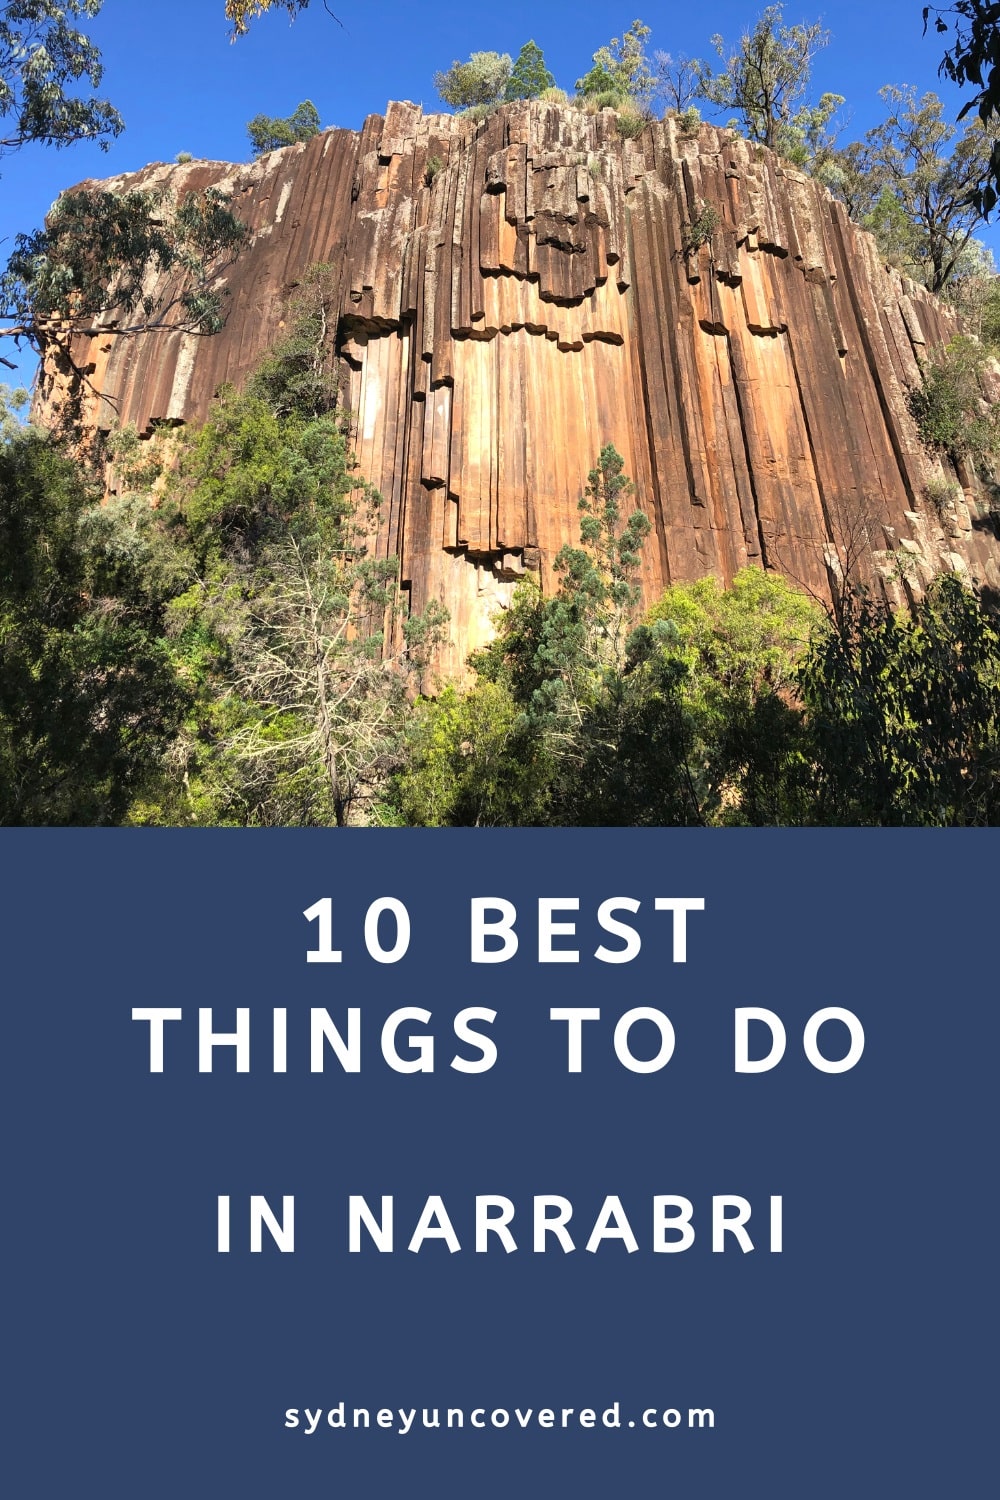 10 Best things to do in Narrabri and surrounds